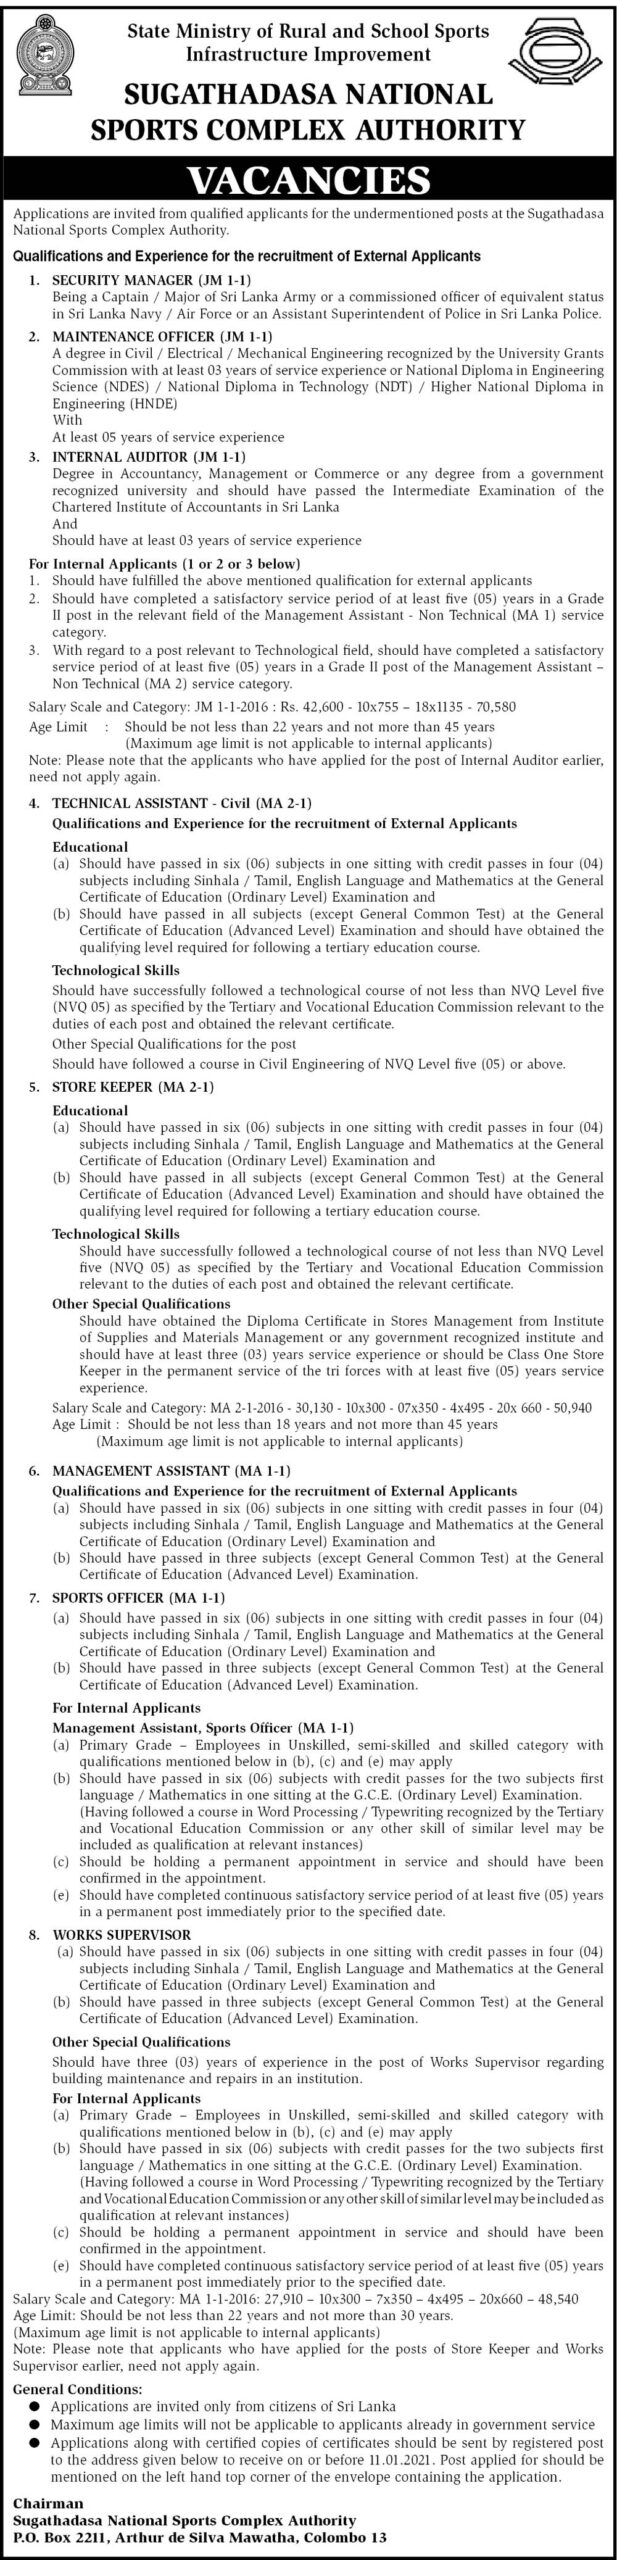 Security Manager, Maintenance Officer, Internal Auditor, Technical Assistant, Store Keeper, Management Assistant, Sports Officer, Works Supervisor – Sugathadasa National Sports Complex Authority 2